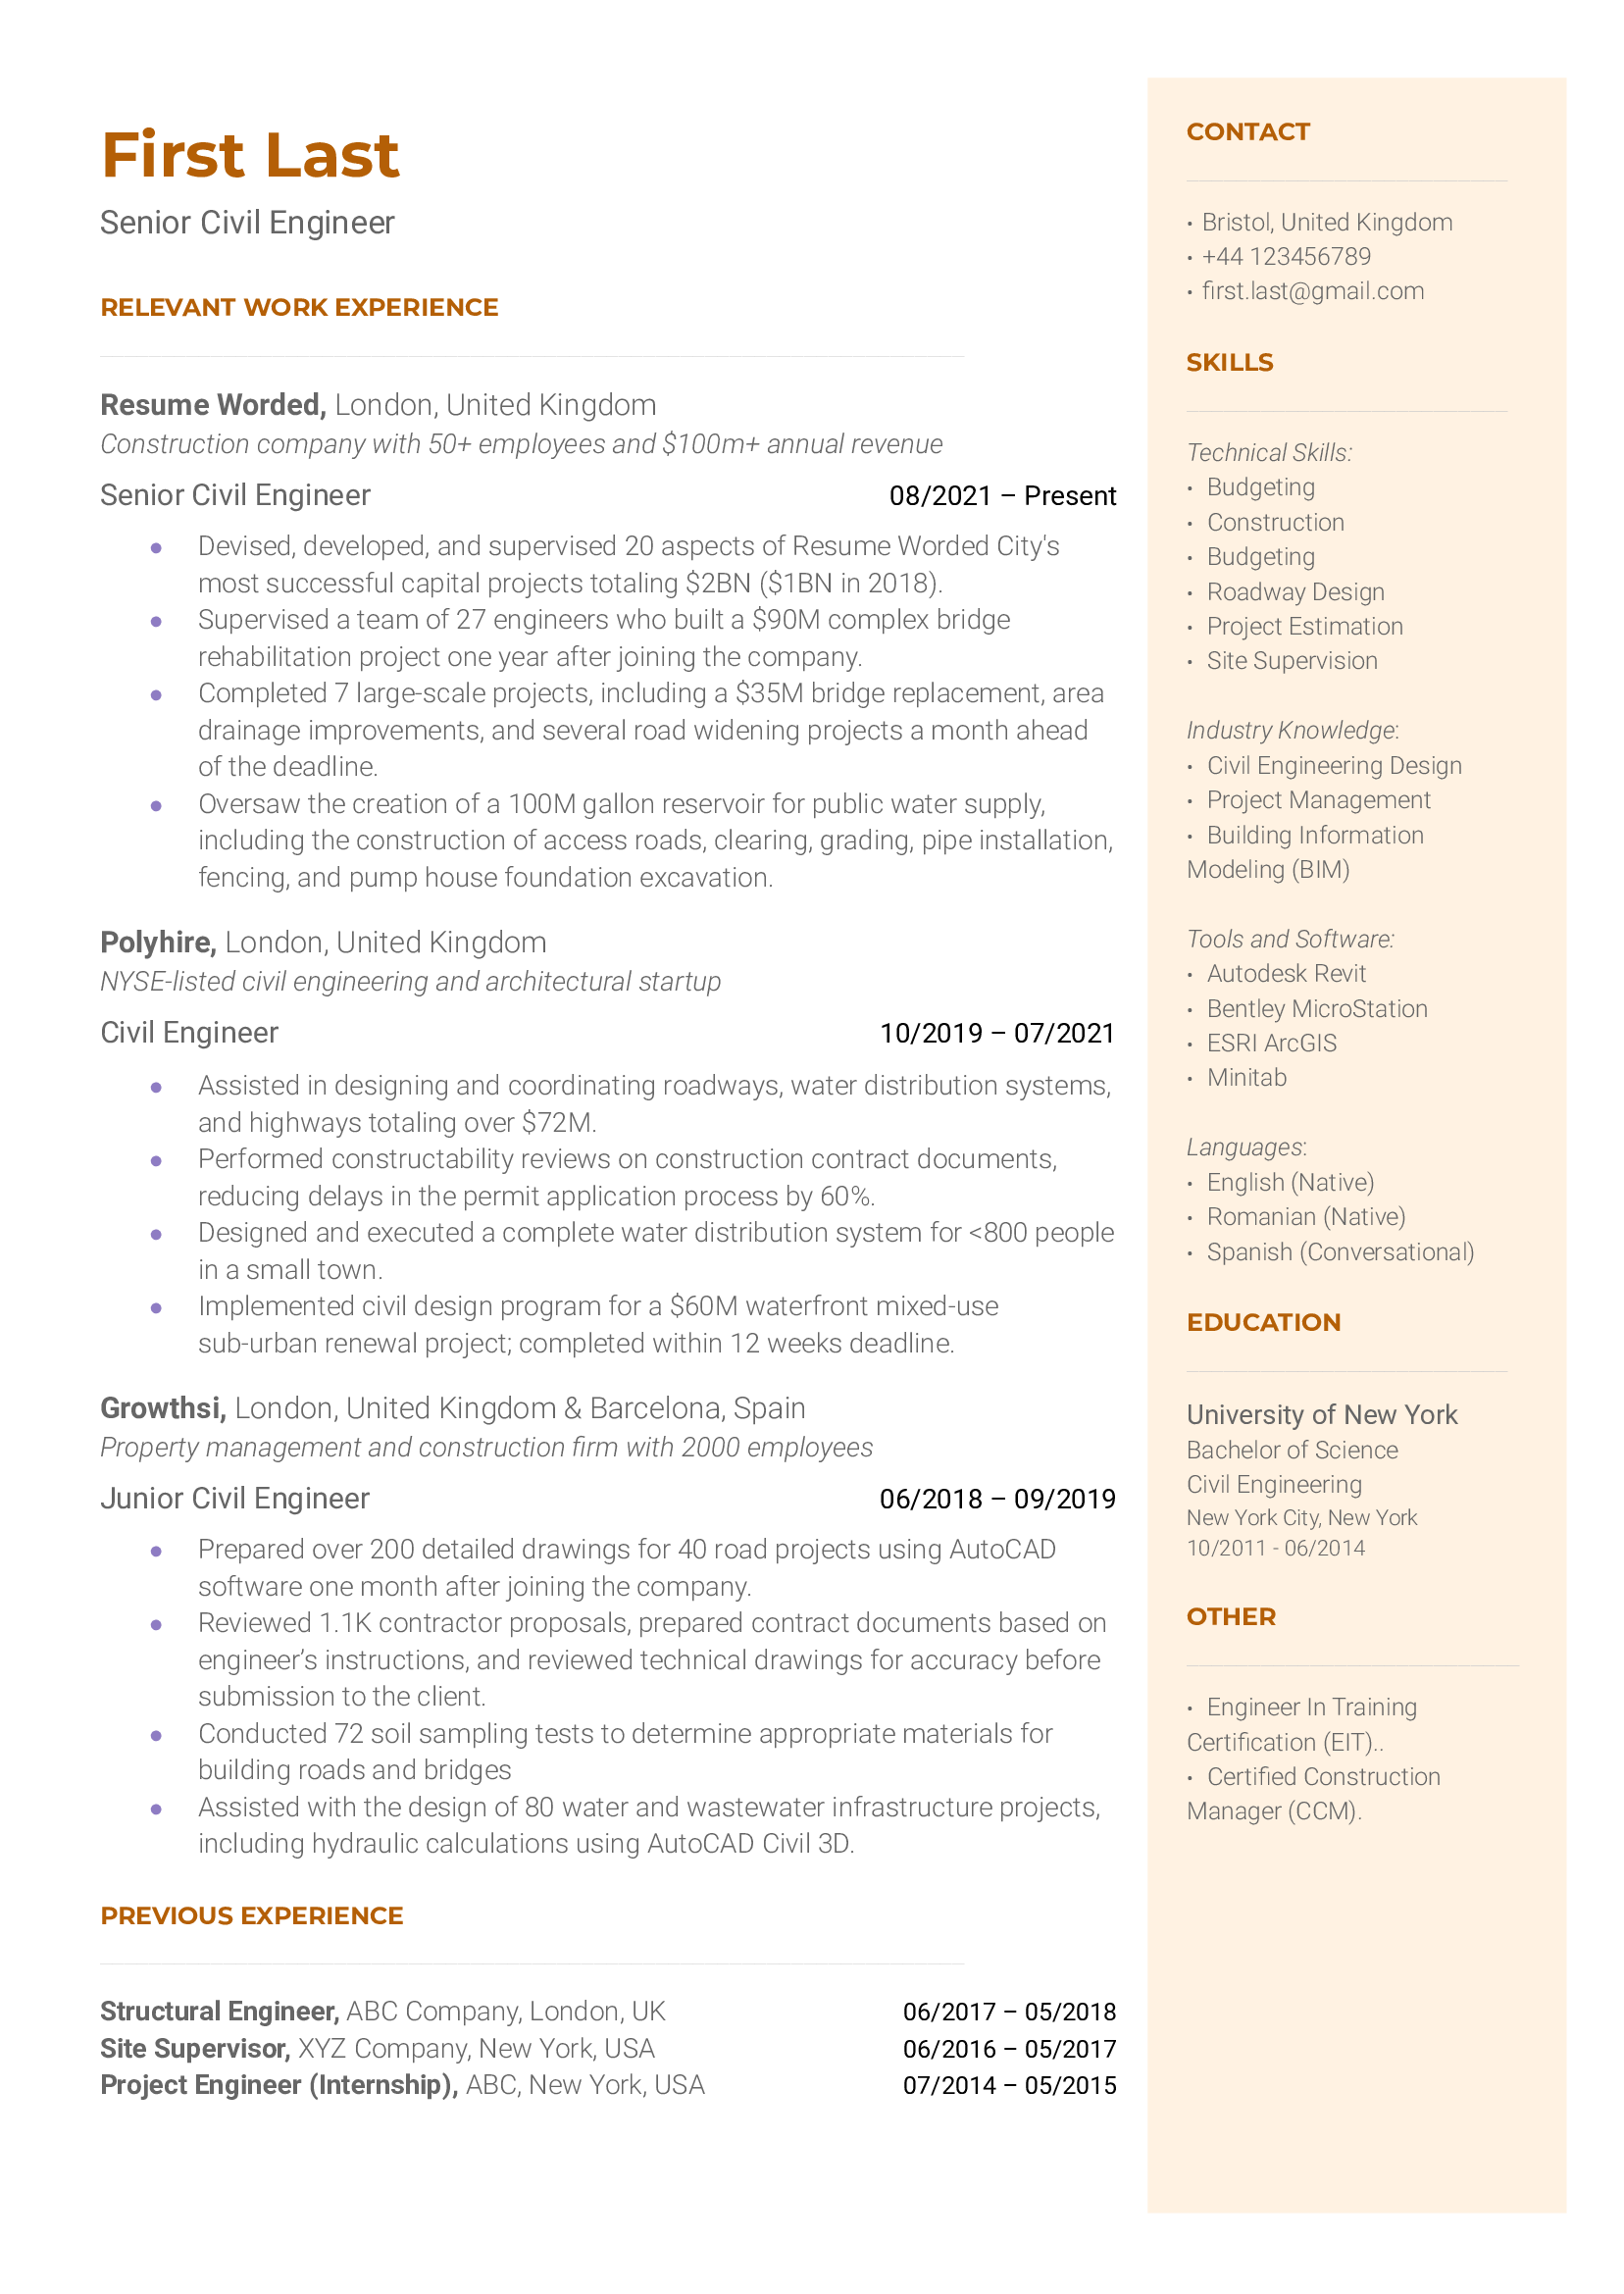 A senior civil engineer resume sample that highlights the applicant’s career progression and  years of experience.